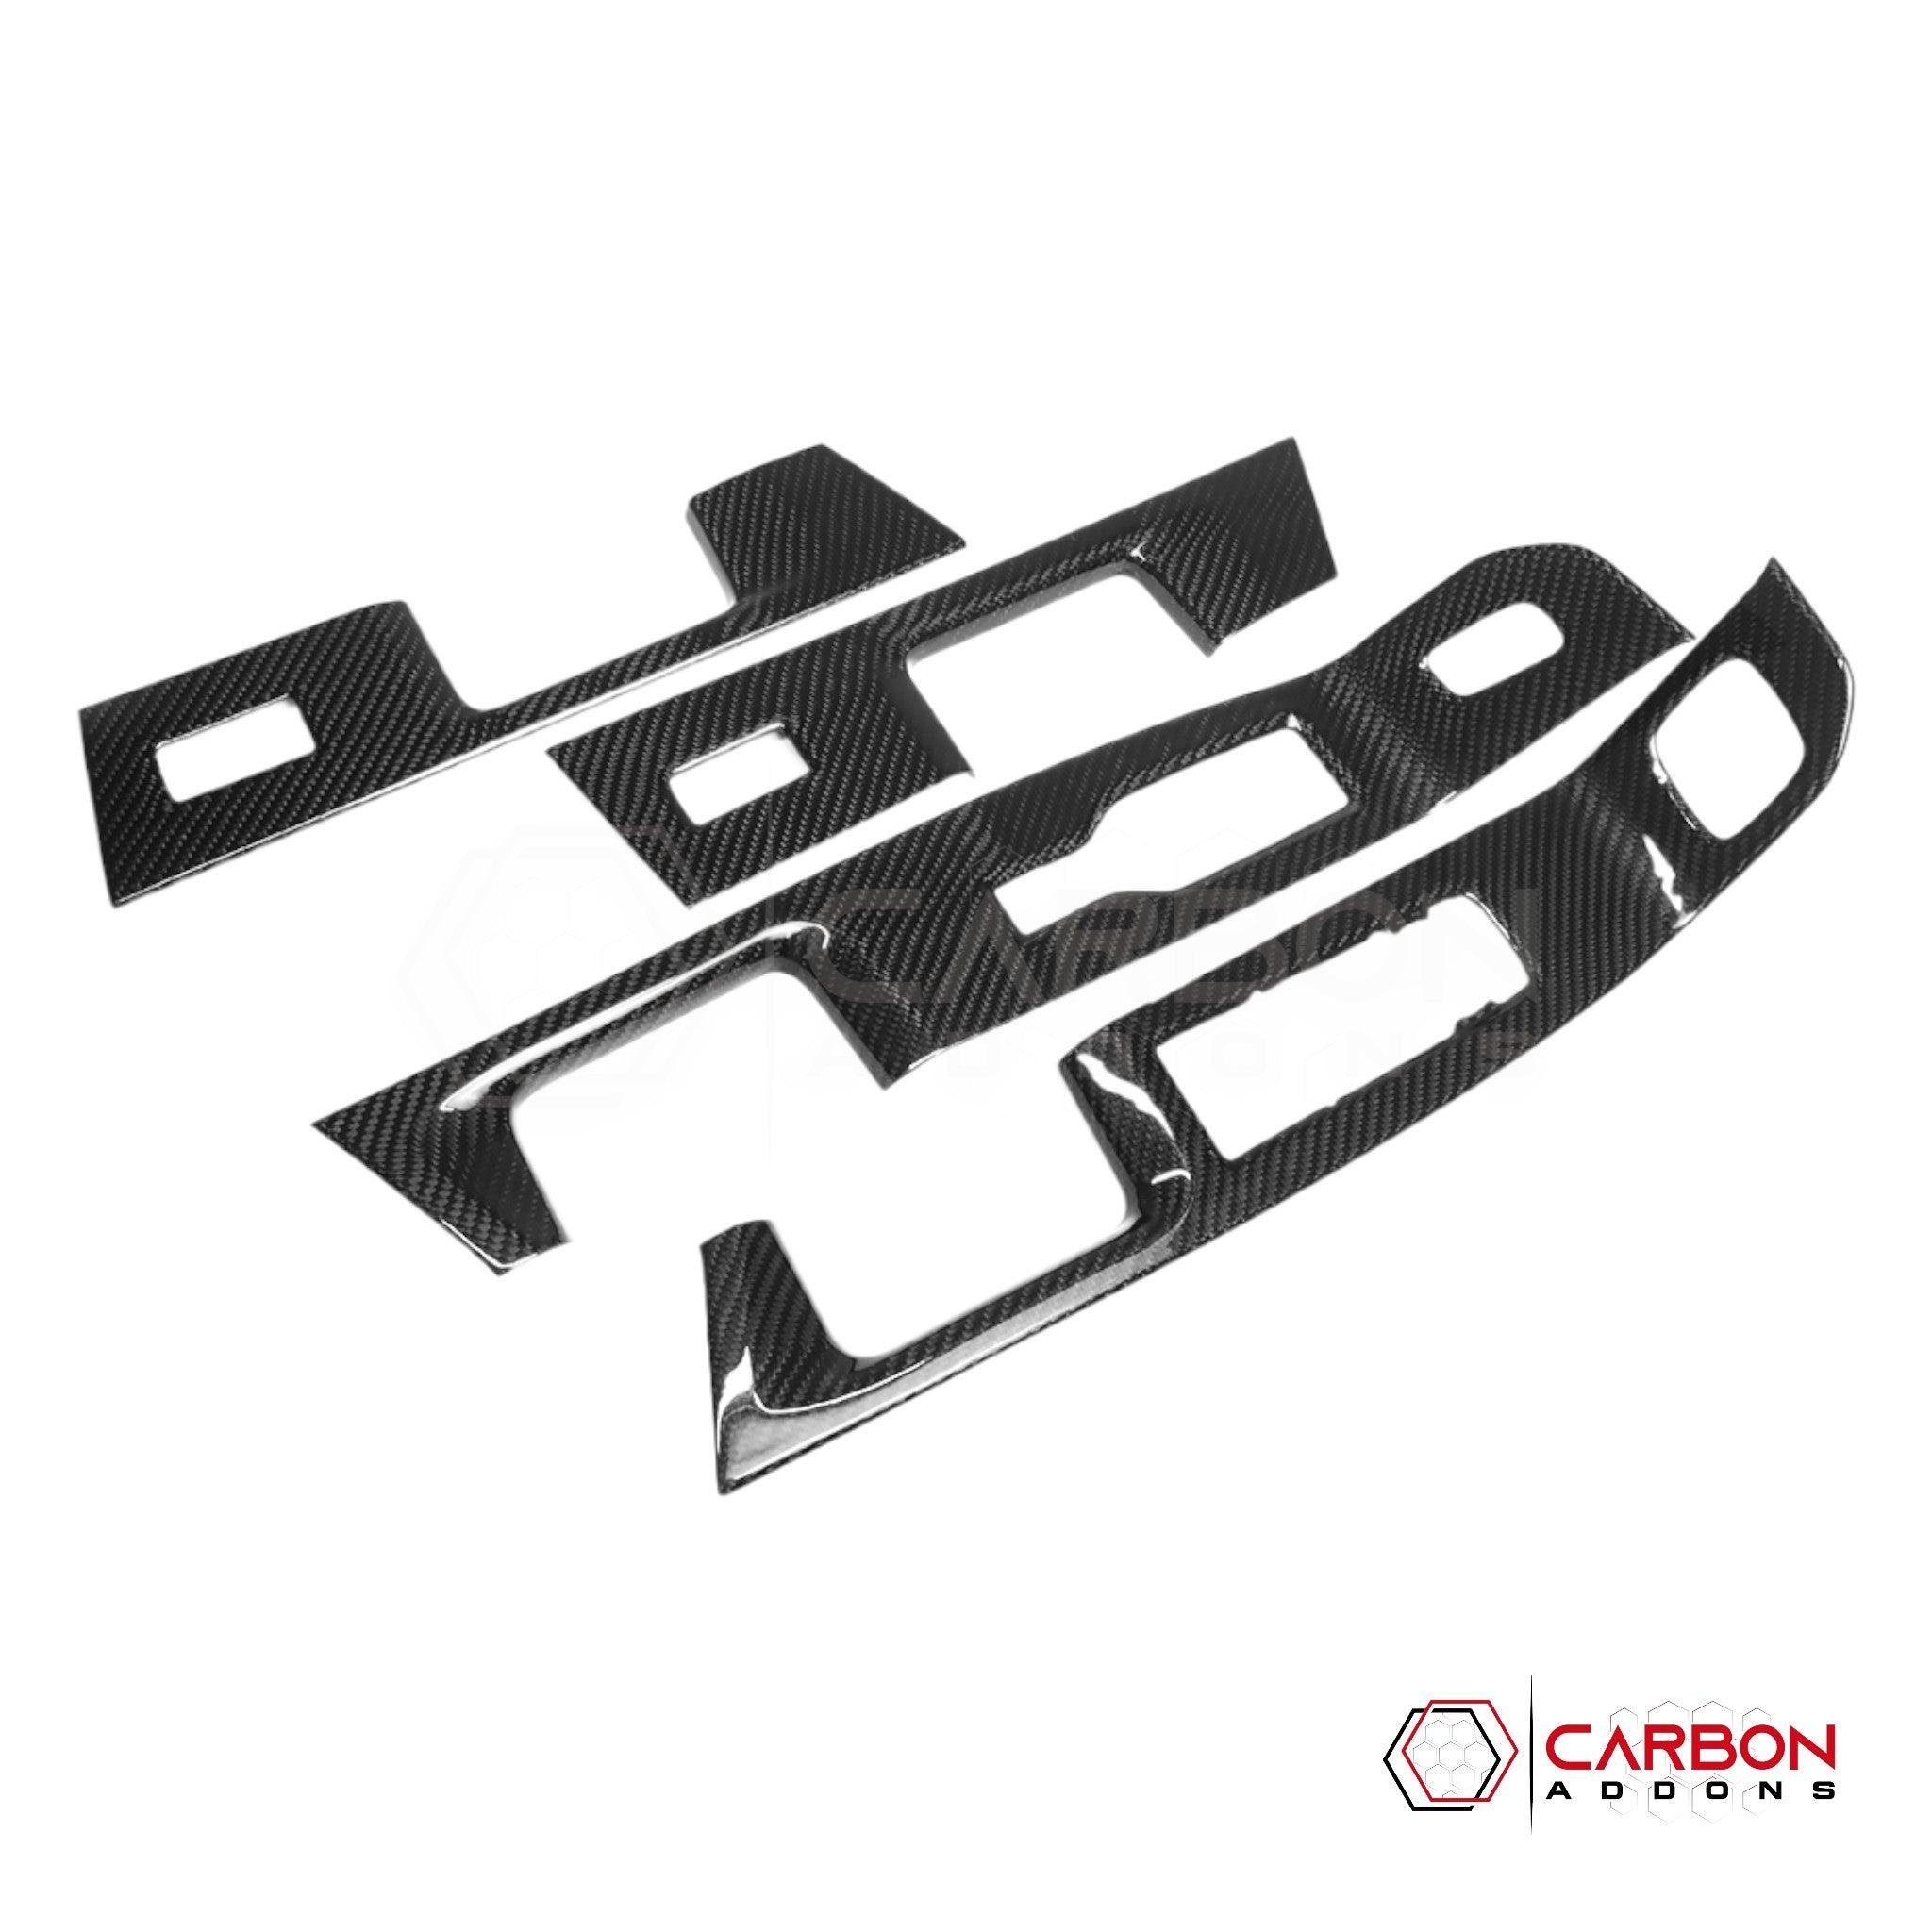 [Coming Soon] Ford F150 2021-Up Window Switch Trim Hard Carbon Fiber Cover - carbonaddons Carbon Fiber Parts, Accessories, Upgrades, Mods